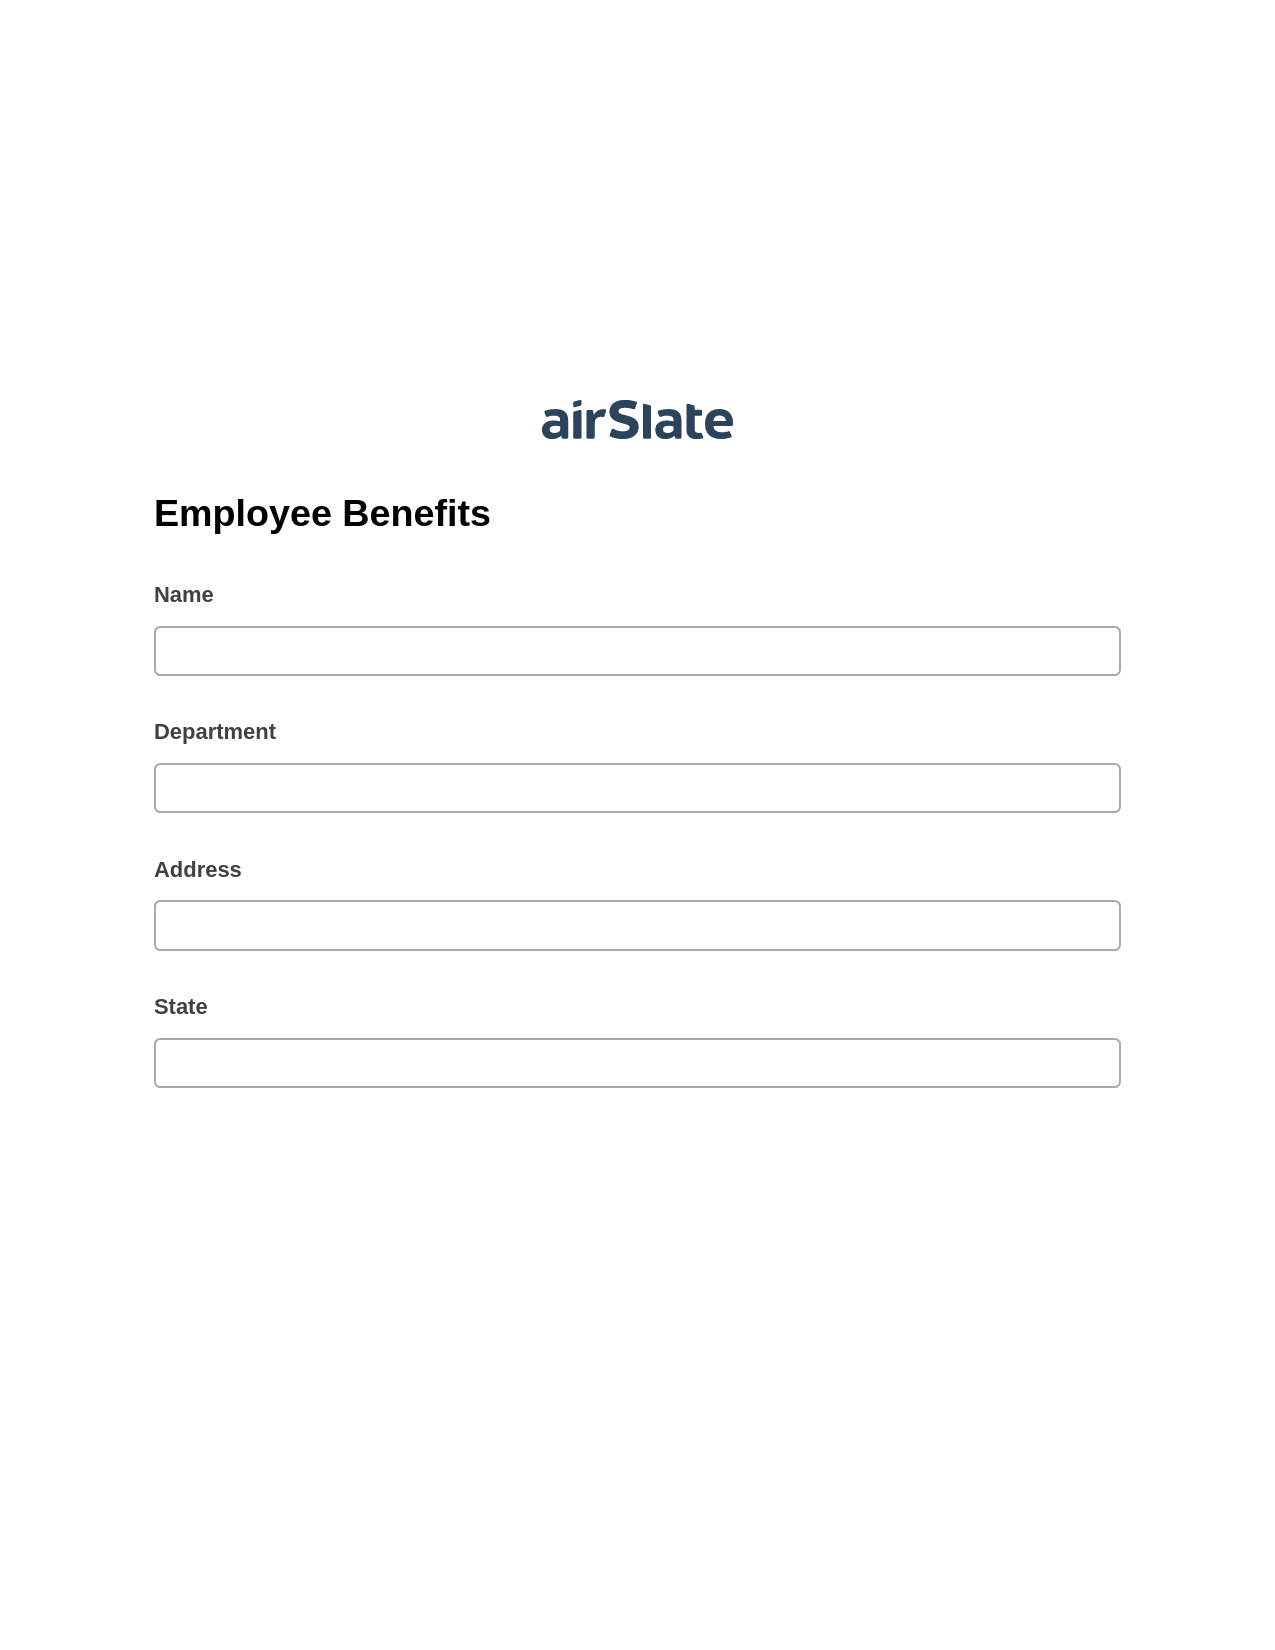 Employee Benefits Pre-fill from CSV File Bot, Google Sheet Two-Way Binding Bot, Export to Formstack Documents Bot